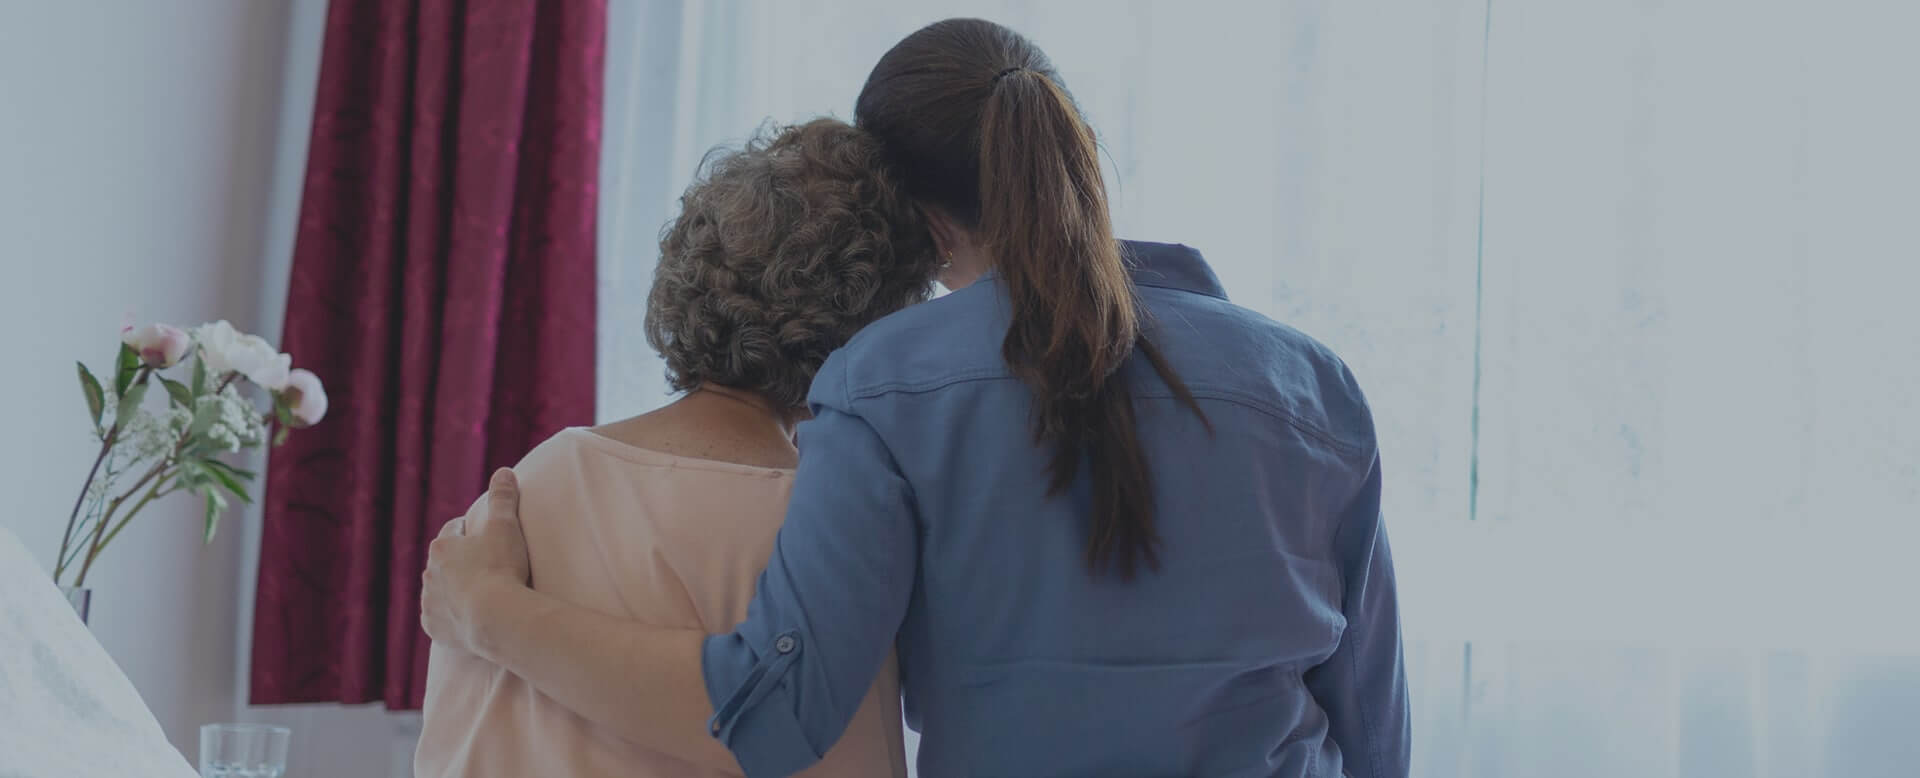 Caregiver embraces elderly client as she provides personal care services for her.